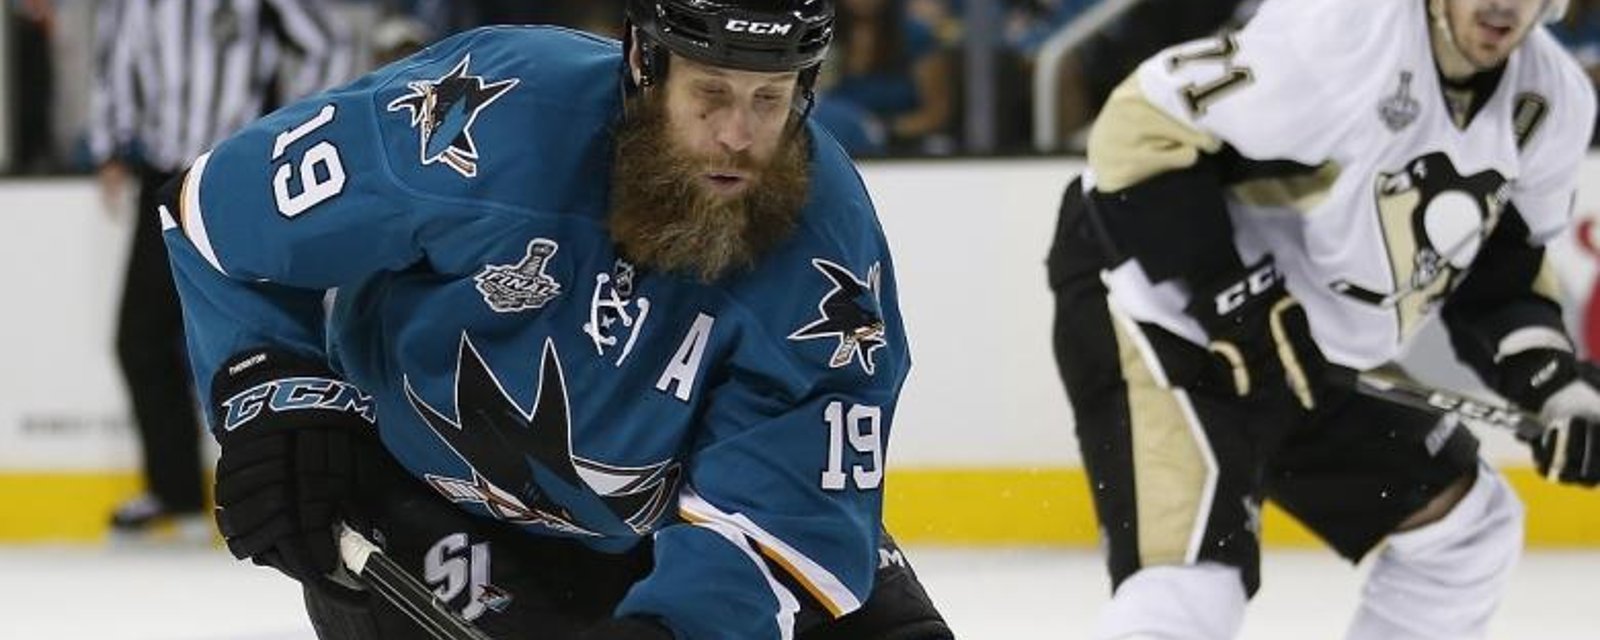 Former NHL great calls Sharks playoff beards 'a disgrace for hockey.'